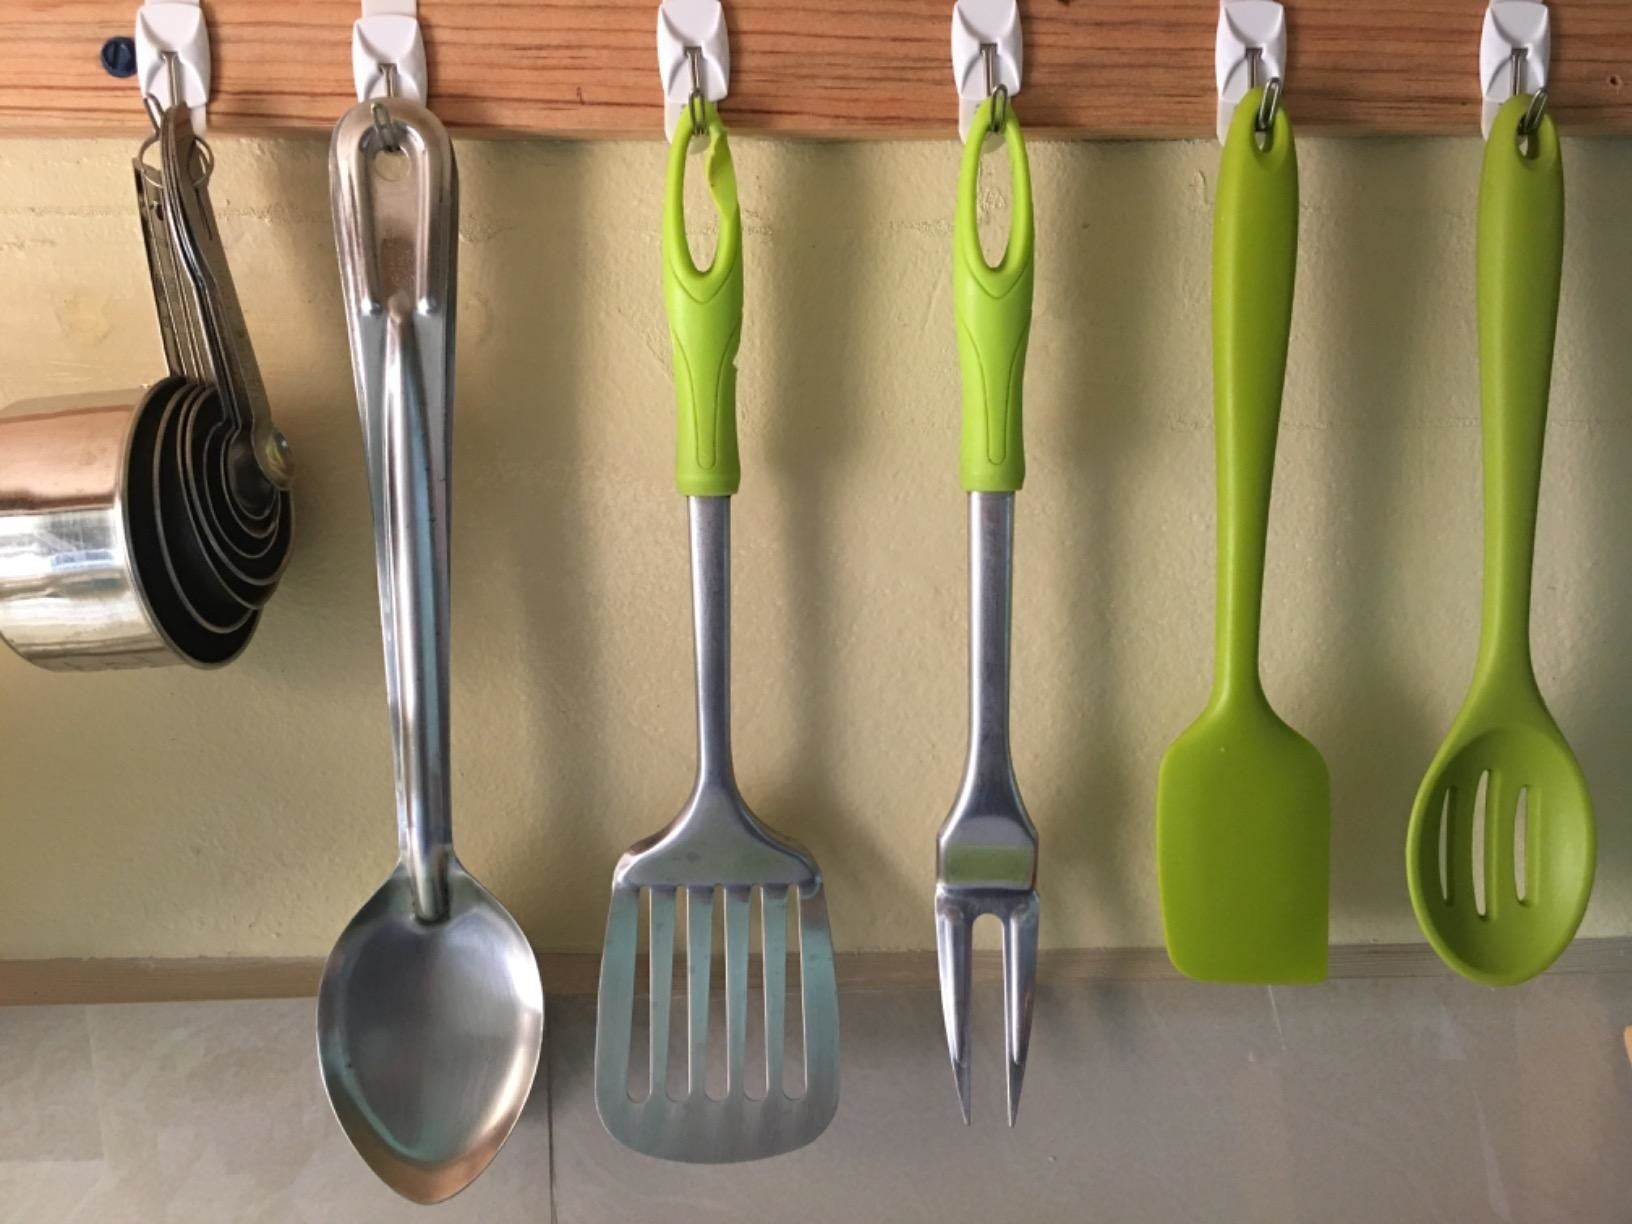 10 Useful Kitchen Tools You'll Love for Under $30